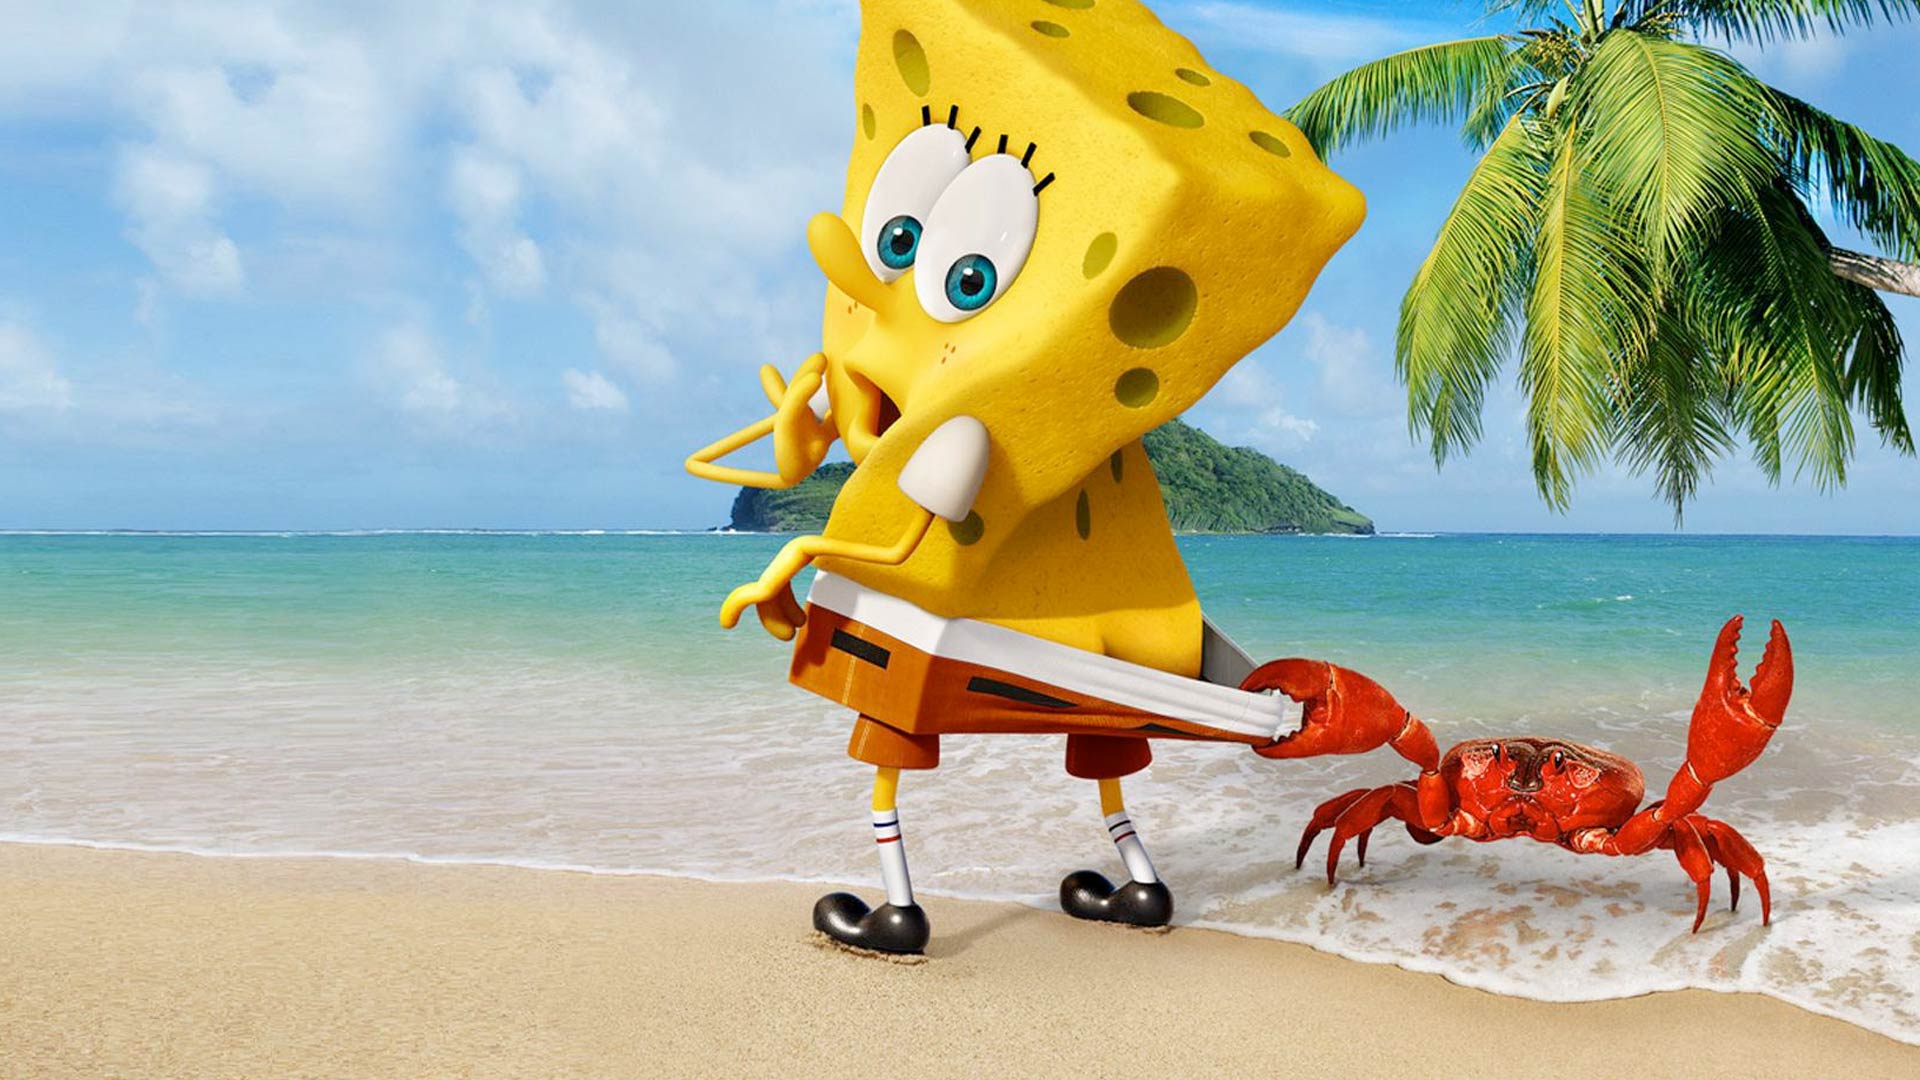 crab out of water spongebob